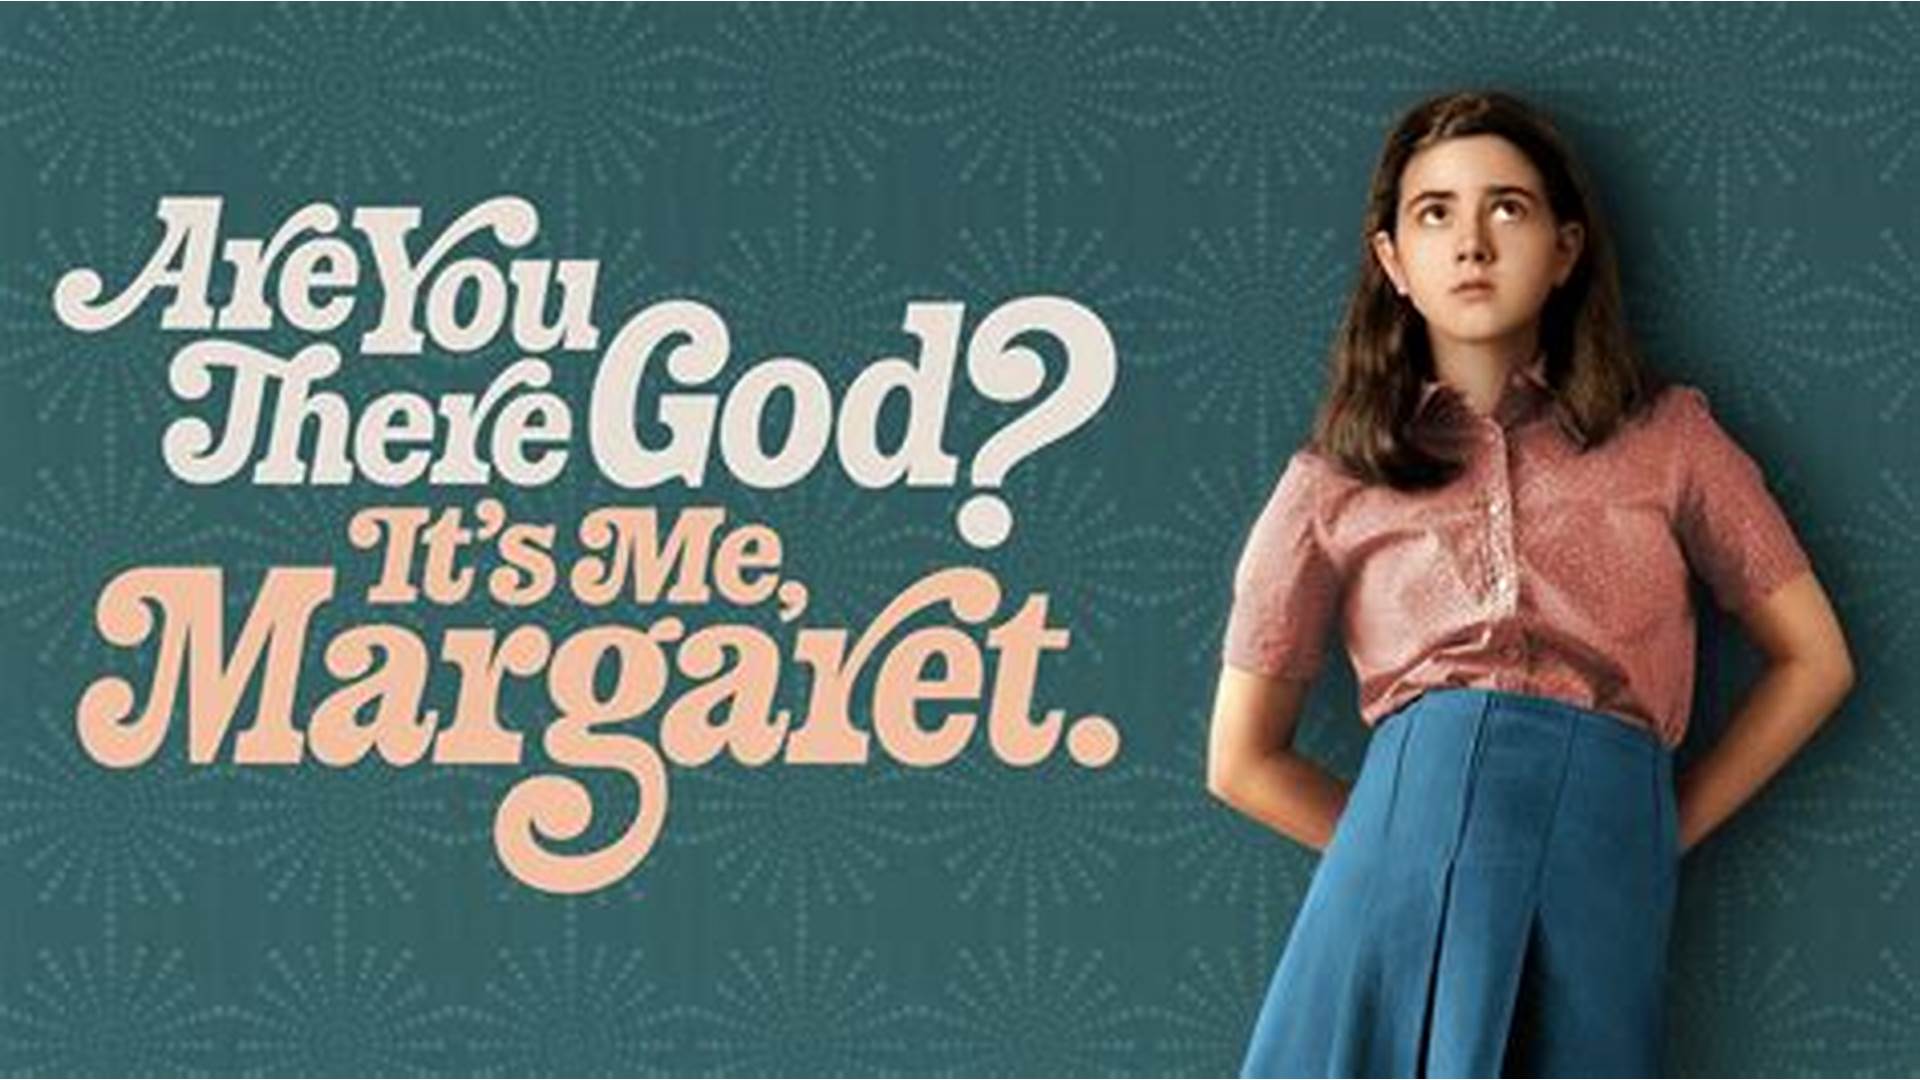 Are you there, God? It’s Me, Margaret